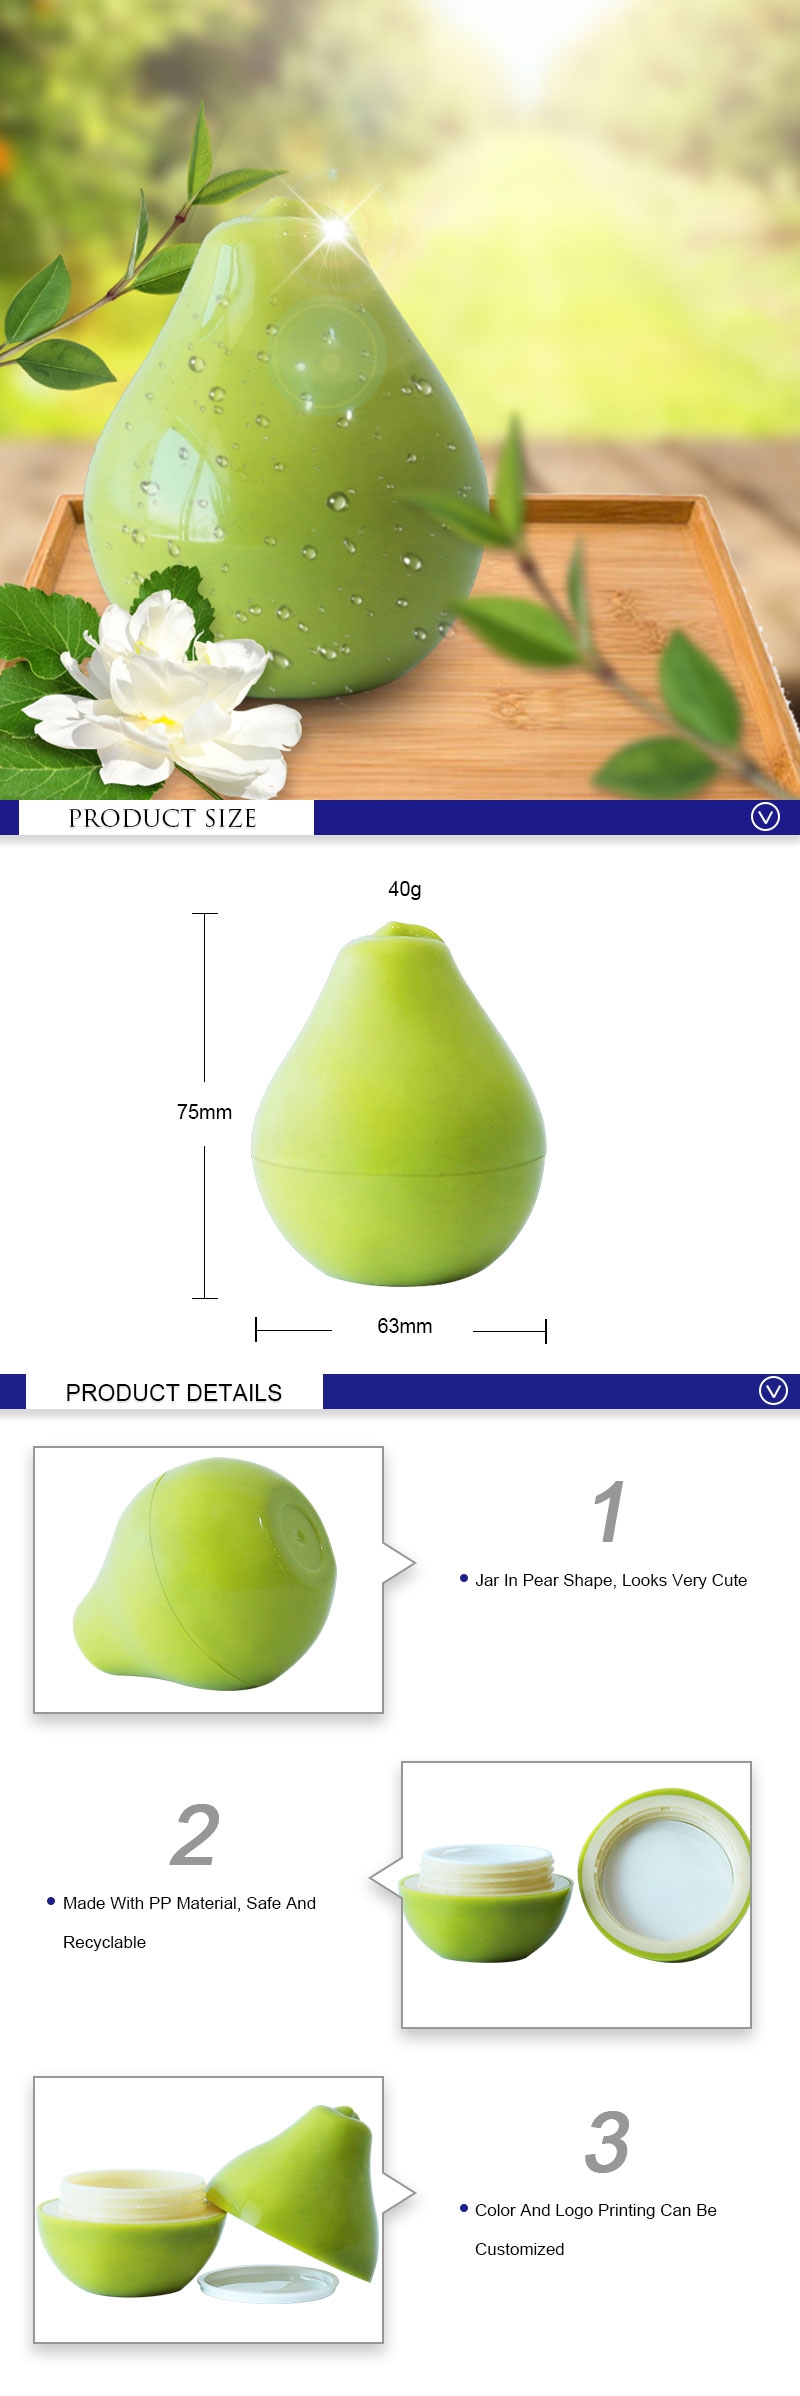 Baby Cream Plastic Cosmetic Containers Jars With Lids Pear Shape 